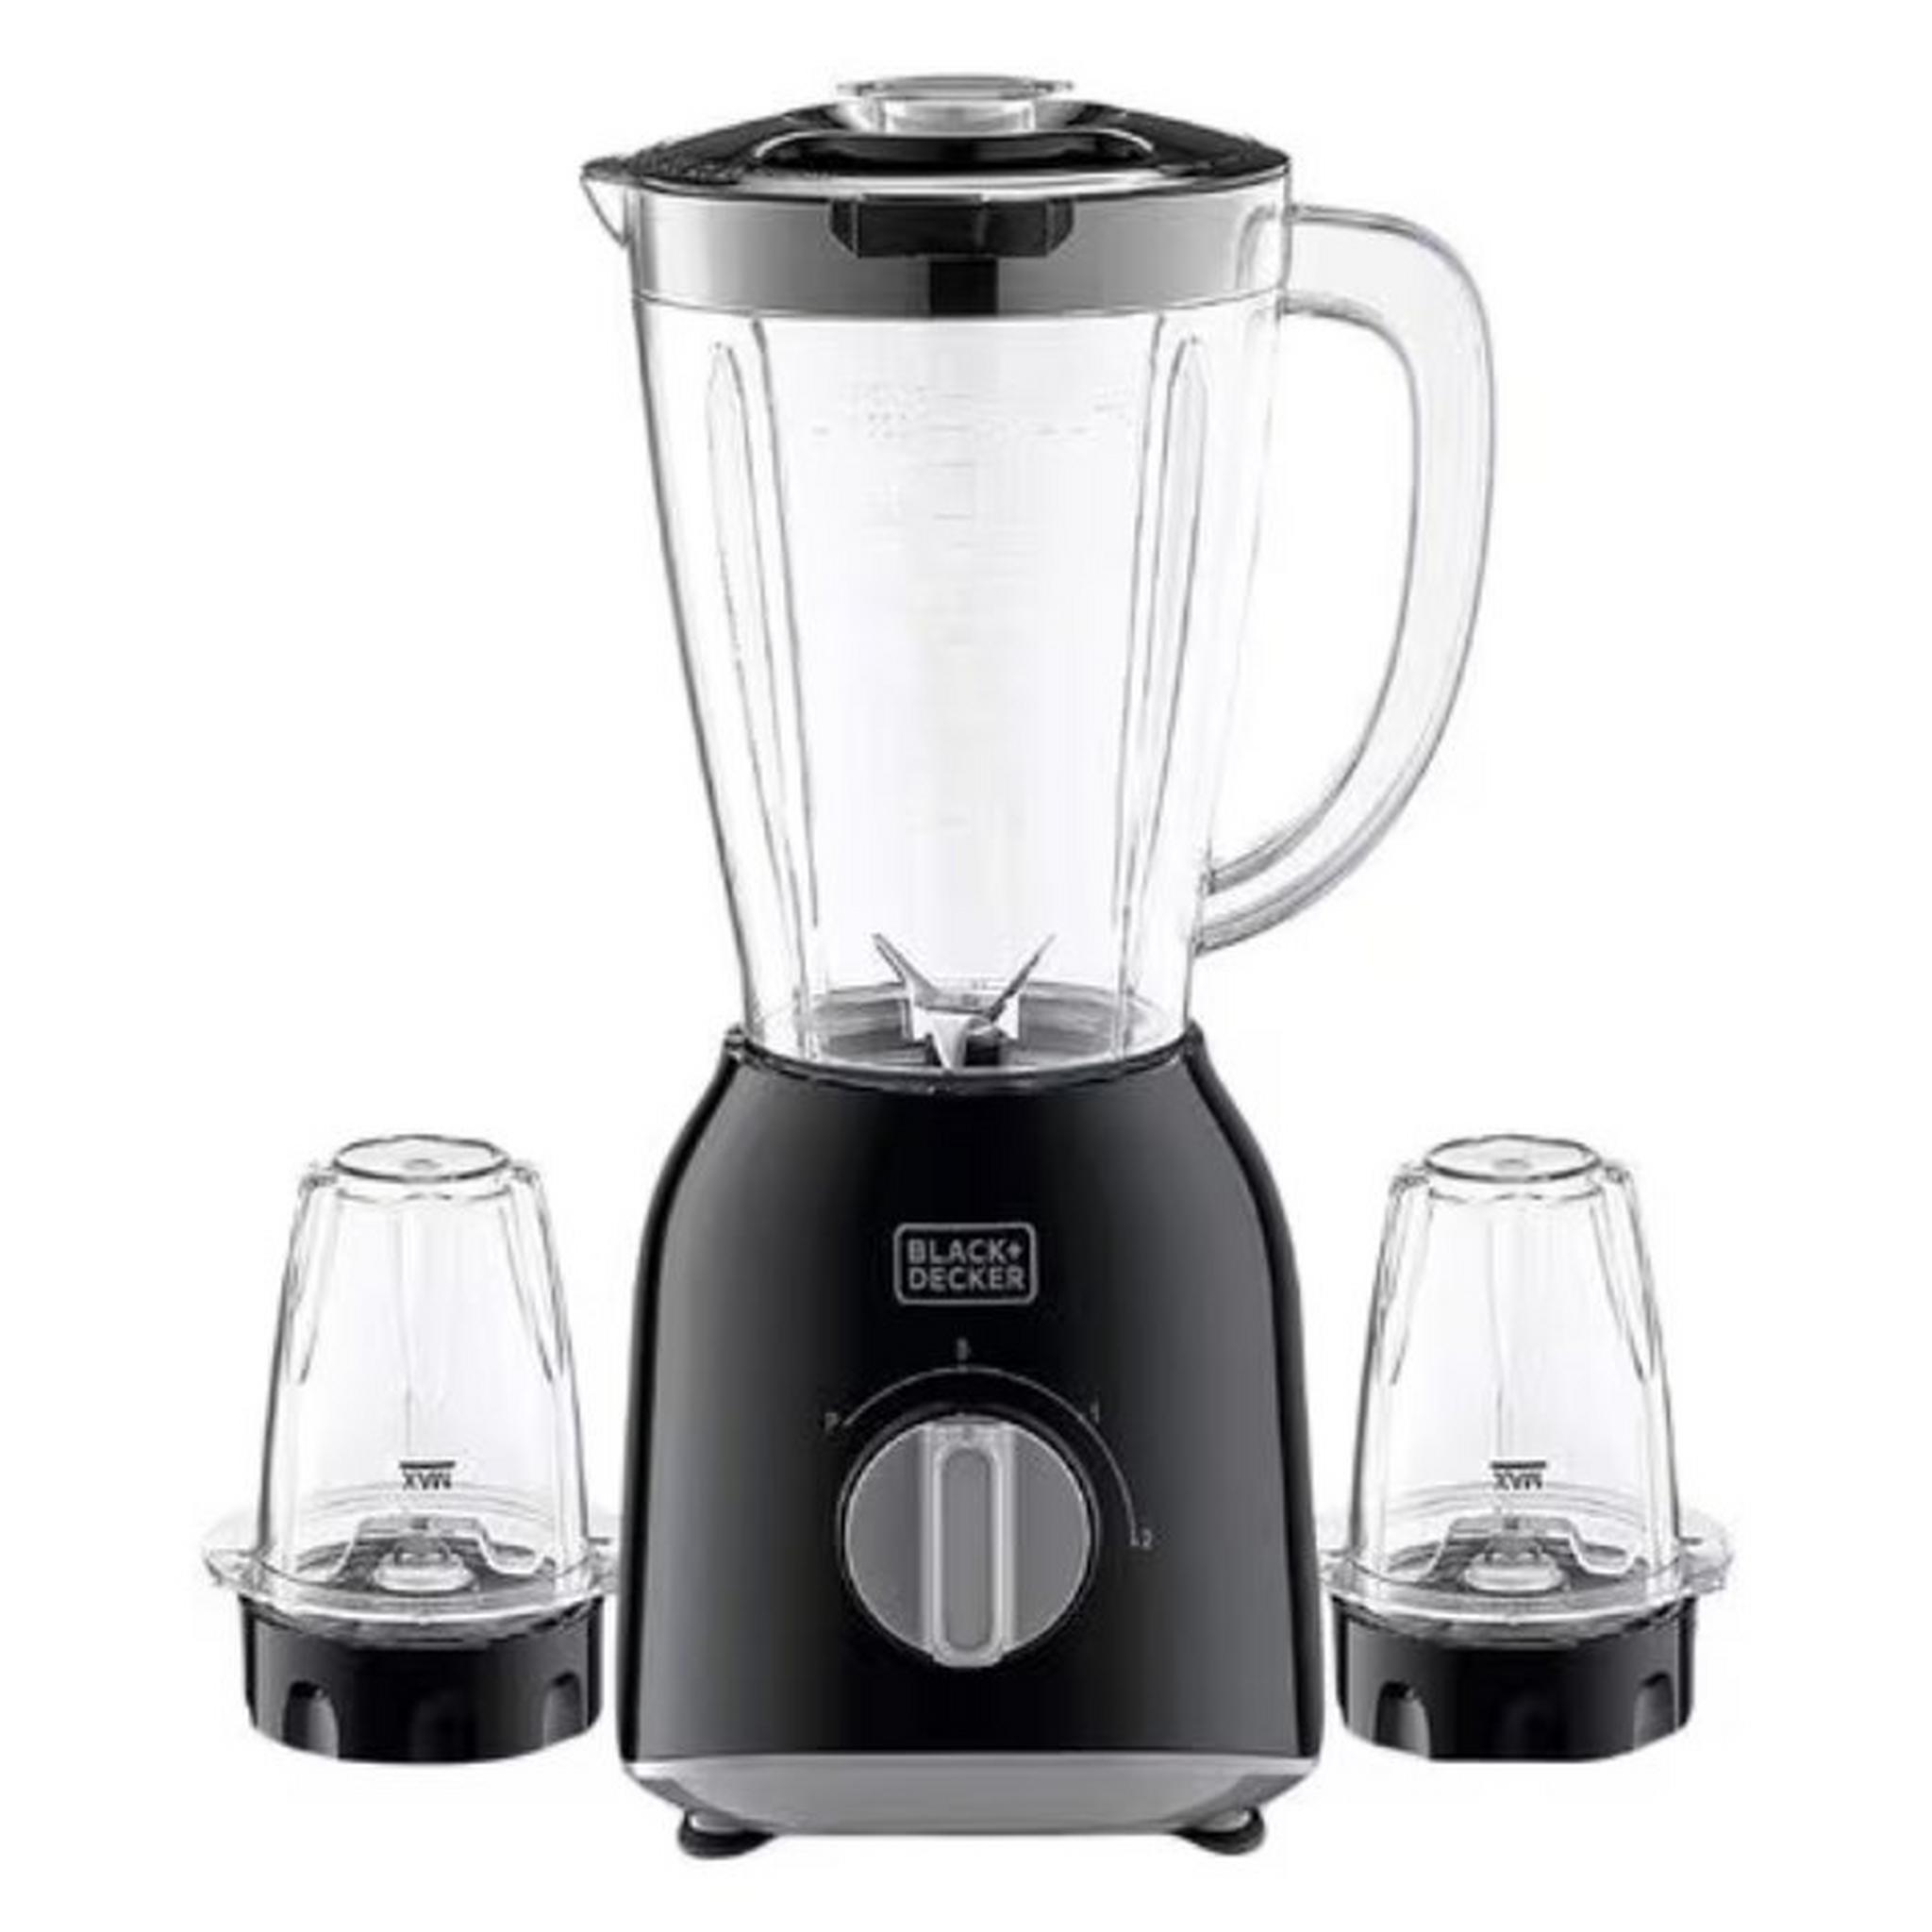 Black & Decker Electric Blender with 2 Mills, 400W, 1.5L, BX365-B5 - Stainless Steel